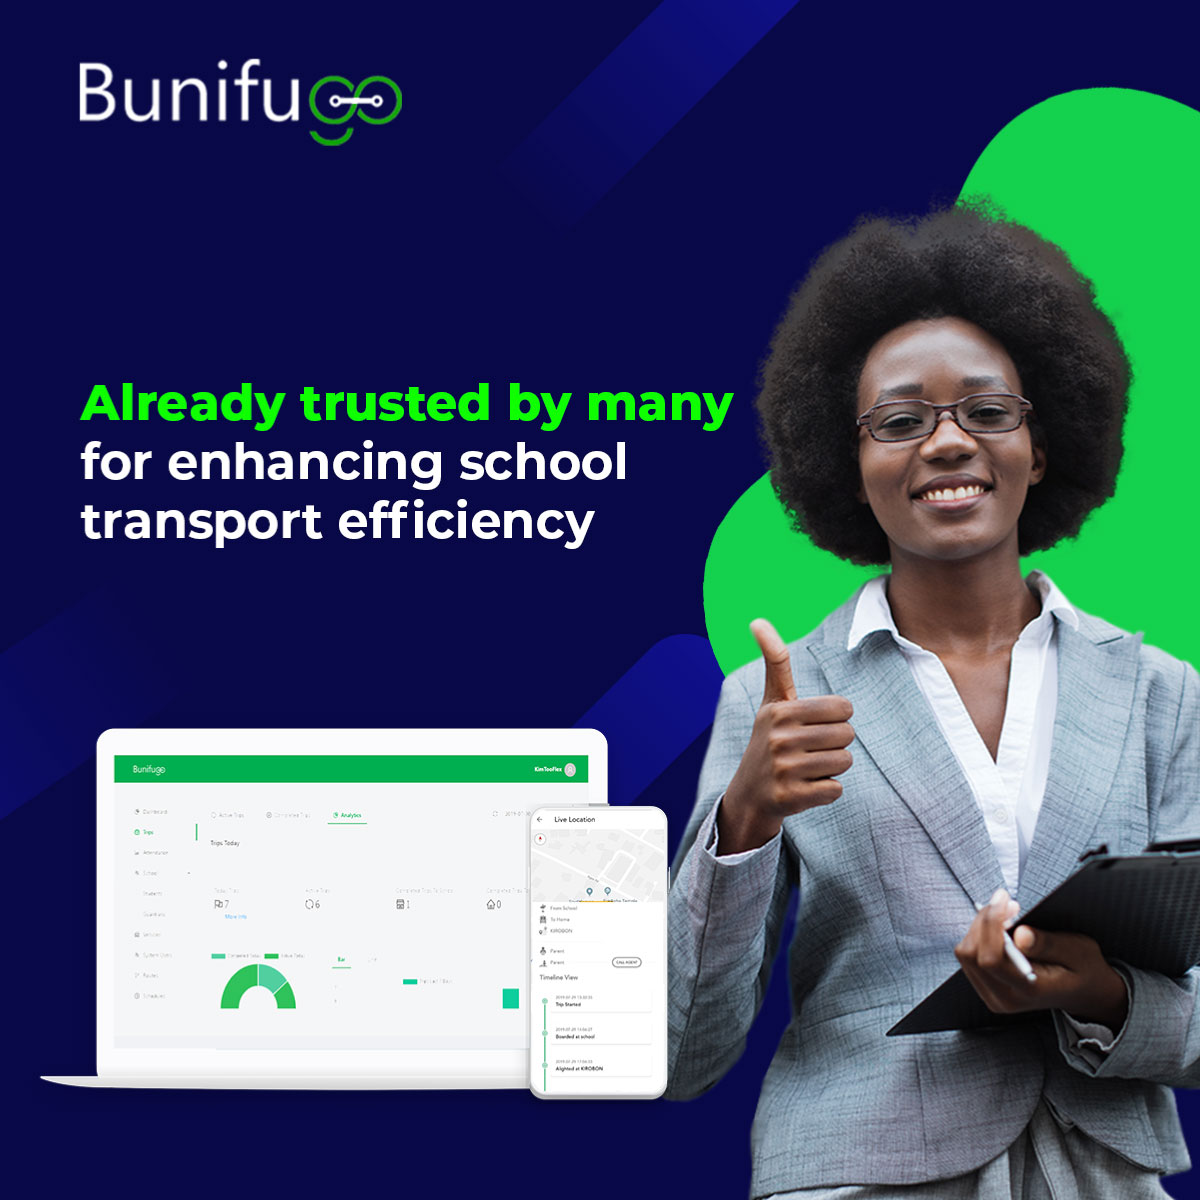 Join Moi Educational Center, Kagaki School, & St. Bhakita Elite Schools & others using Bunifu Go for safe, efficient school transport & communication

👉 Learn more dlvr.it/ShWLK0

#SchoolReopening #SafeSchoolsKE  @safe_schoolske dlvr.it/ShWLK1